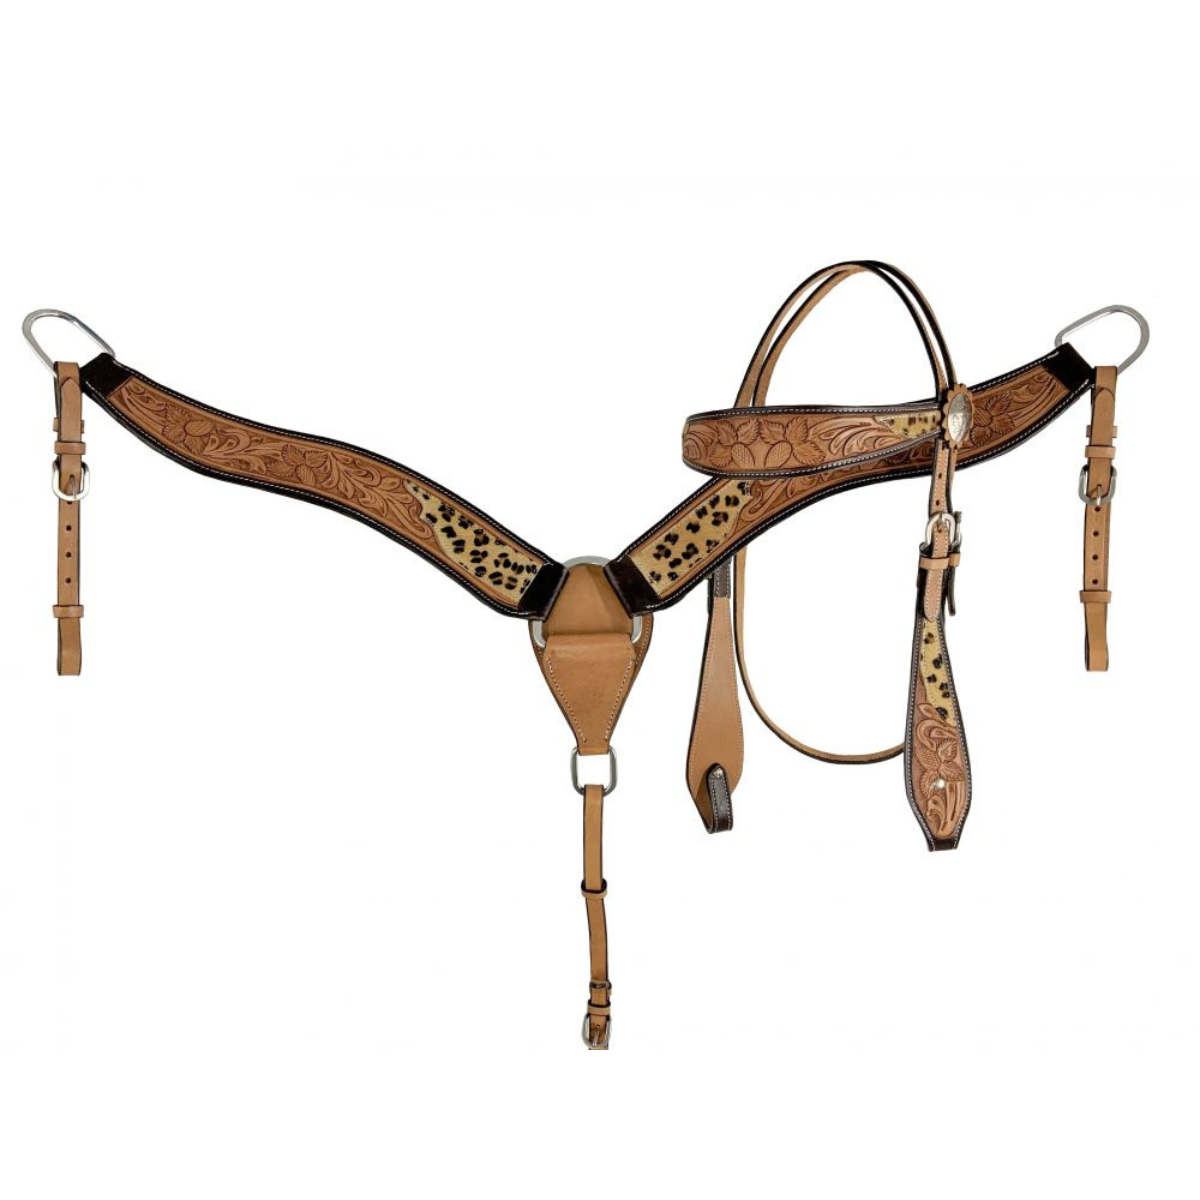 15" Double T  combo basketweave and floral tooling Barrel saddle Set with Hair on Cheetah Seat - Double T Saddles